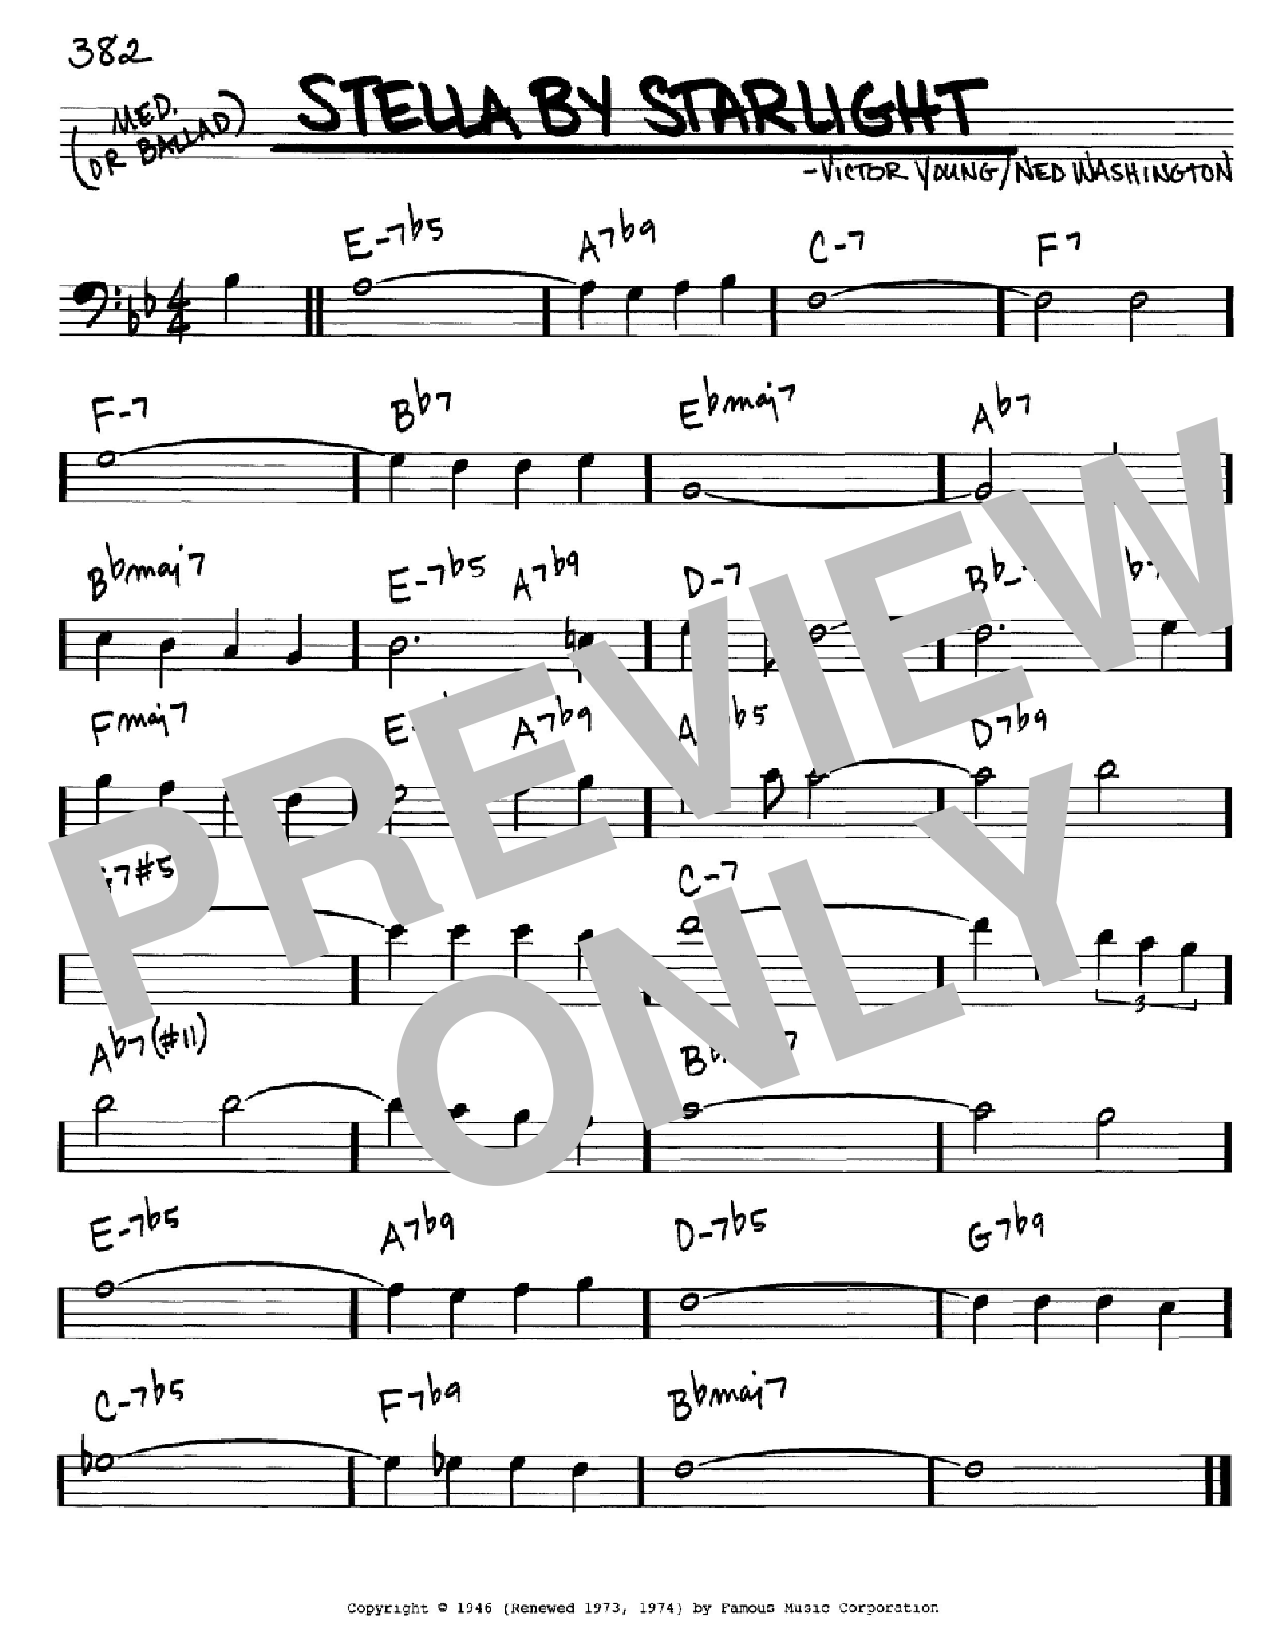 Download Victor Young Stella By Starlight Sheet Music